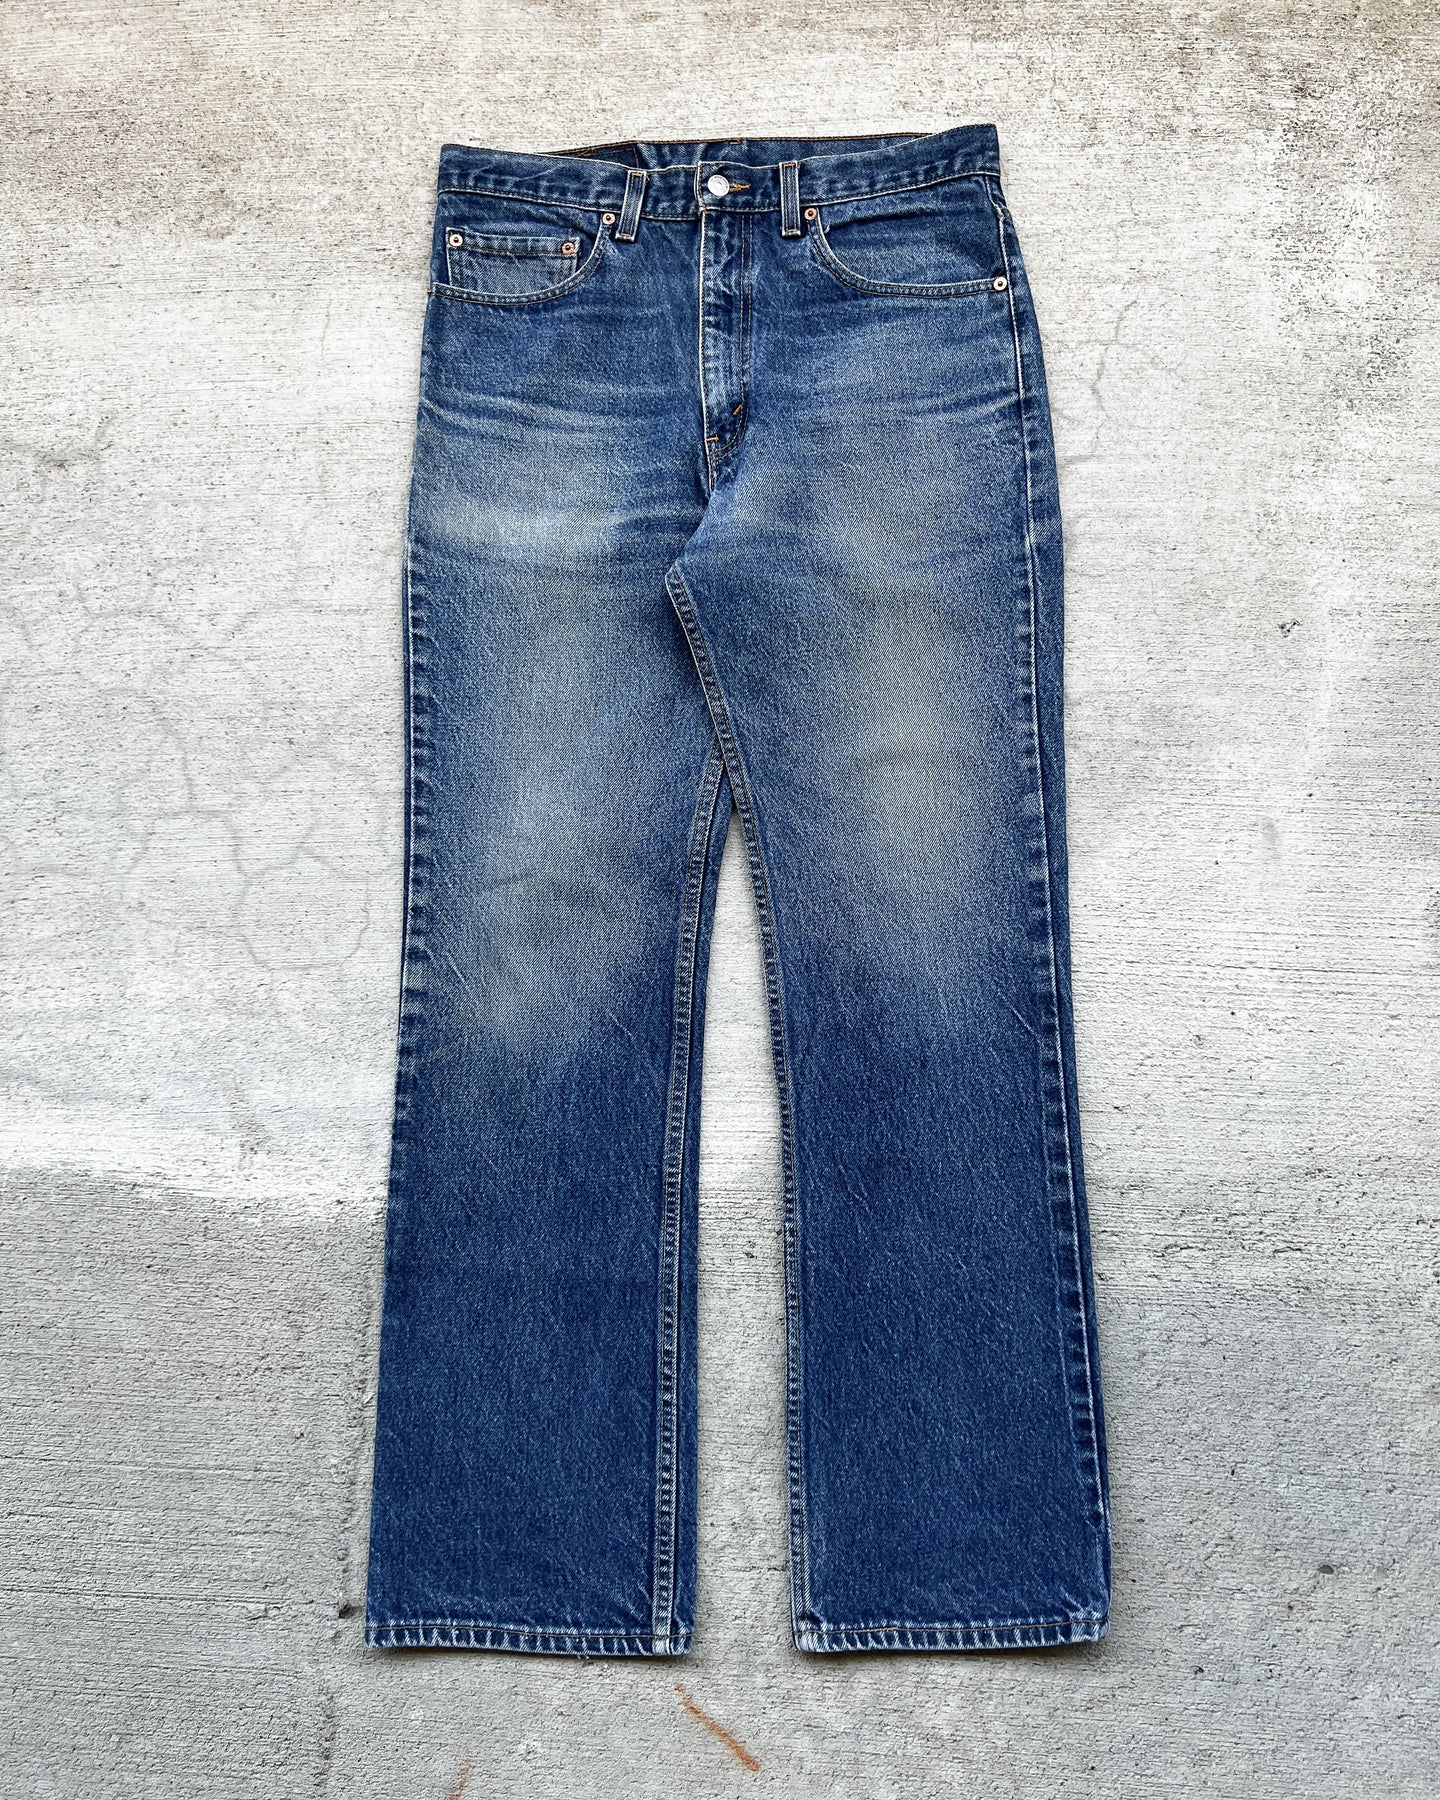 1990s Levi's Well Worn 517 - Size 34 x 31